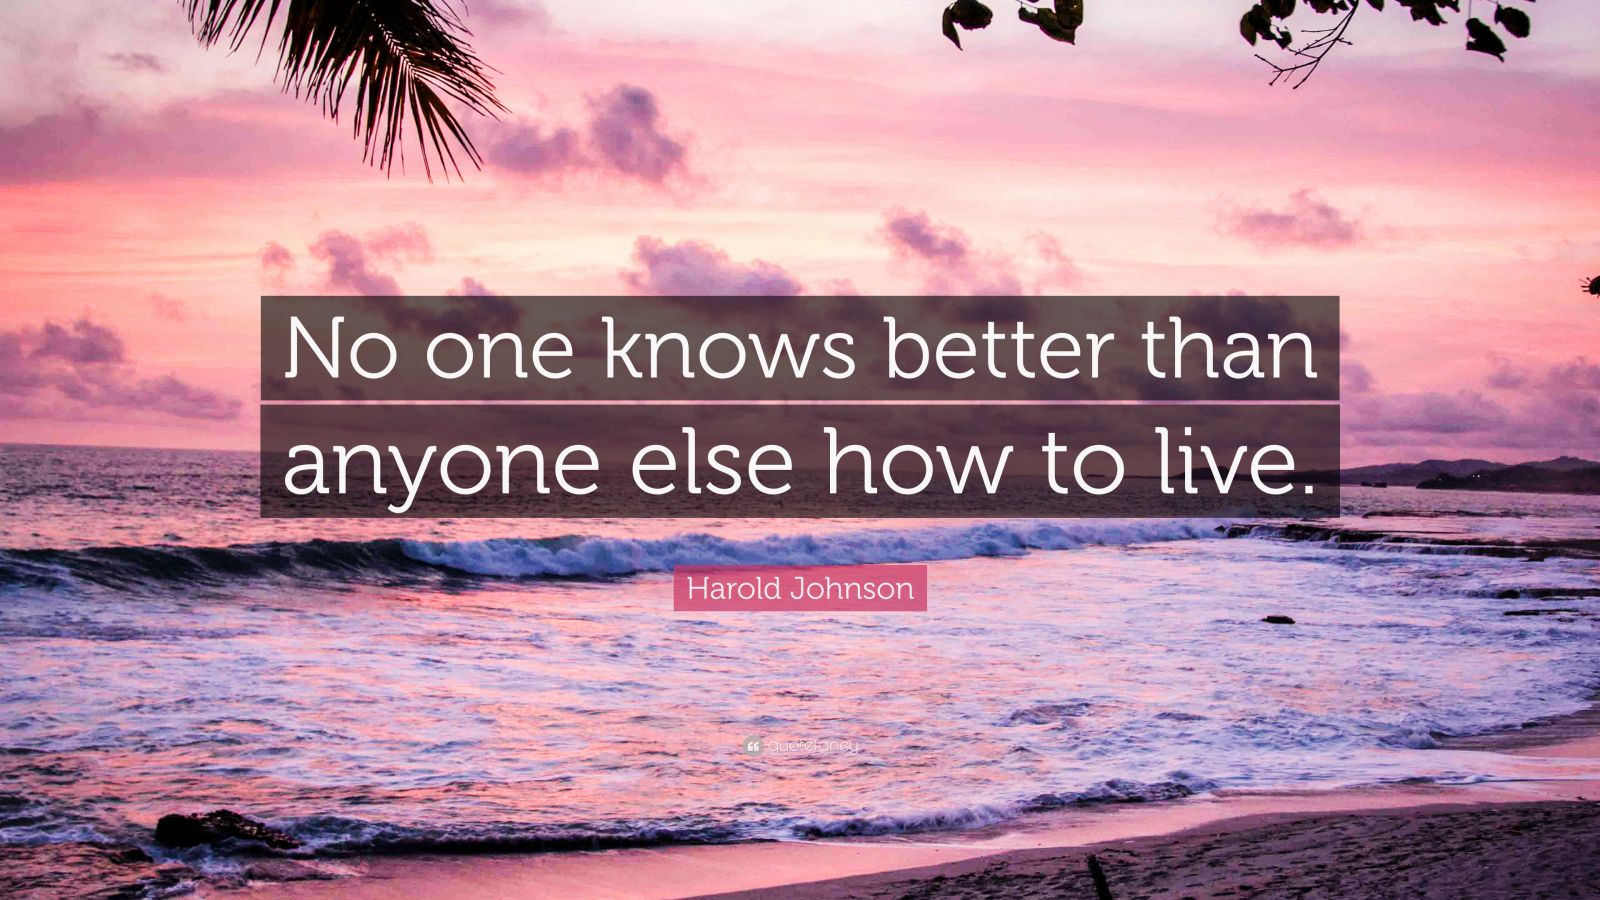 Harold Johnson Quote: “No one knows better than anyone else how to live.”